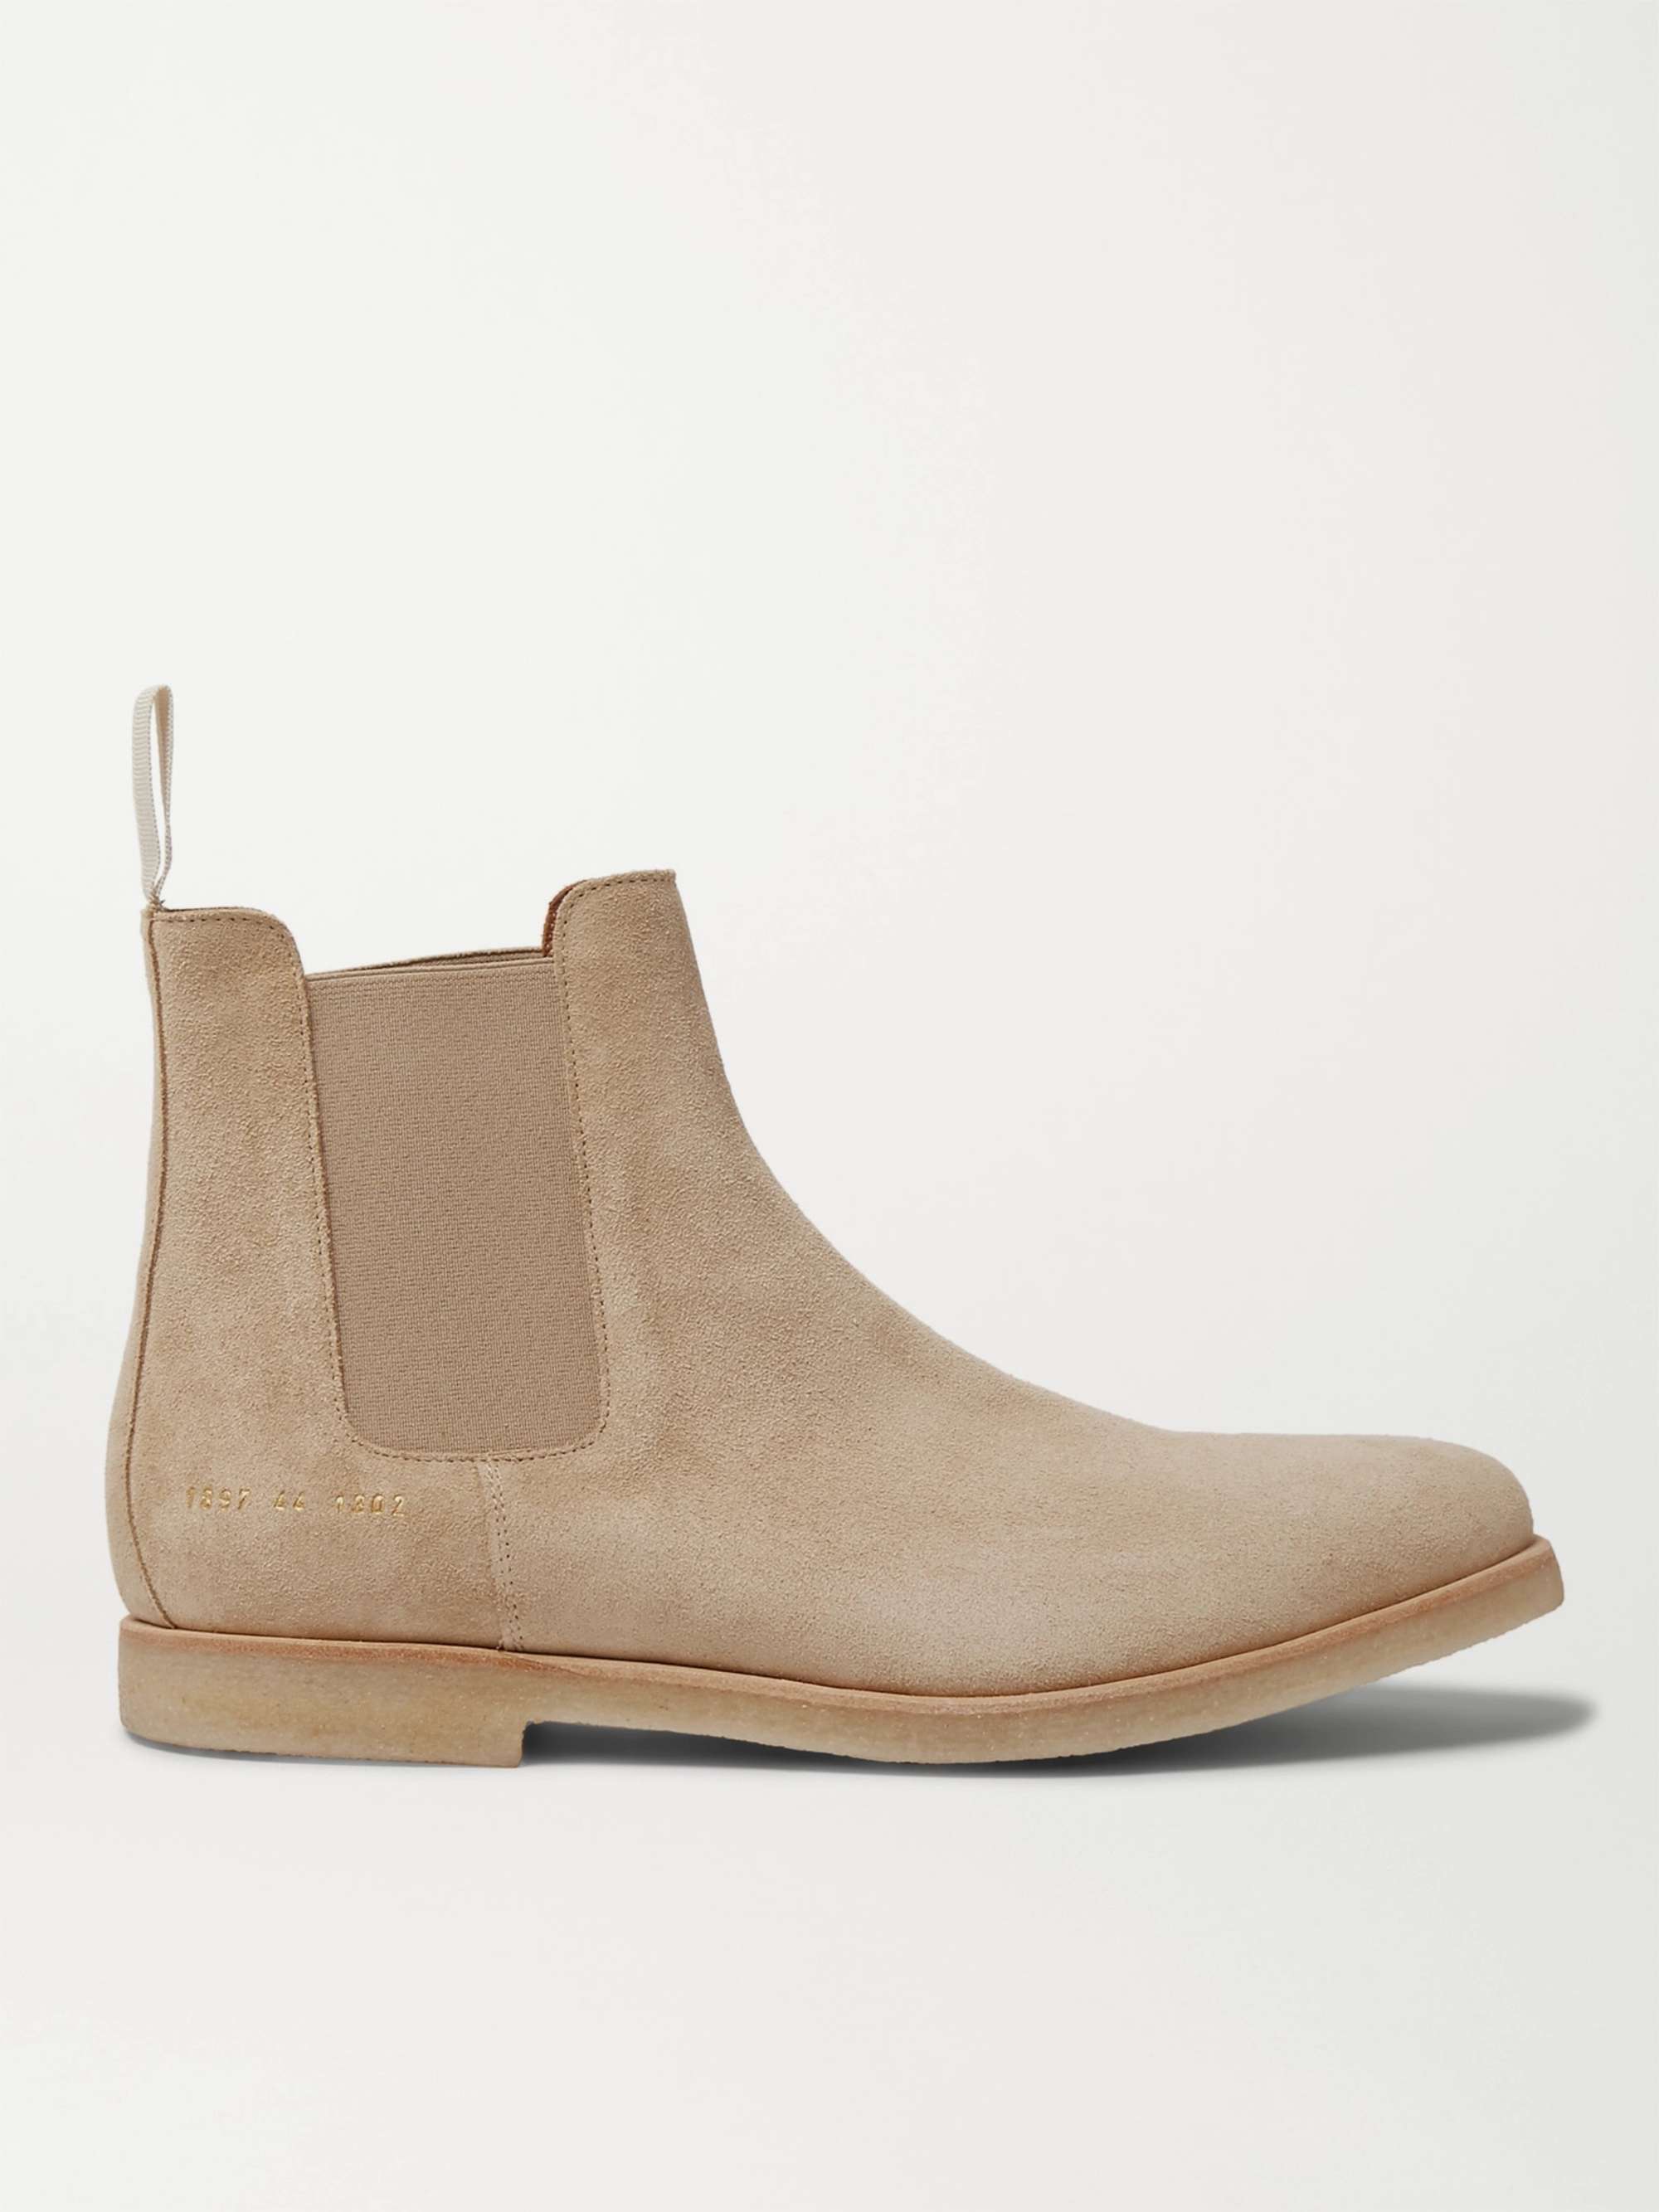 COMMON PROJECTS Suede Chelsea Boots | MR